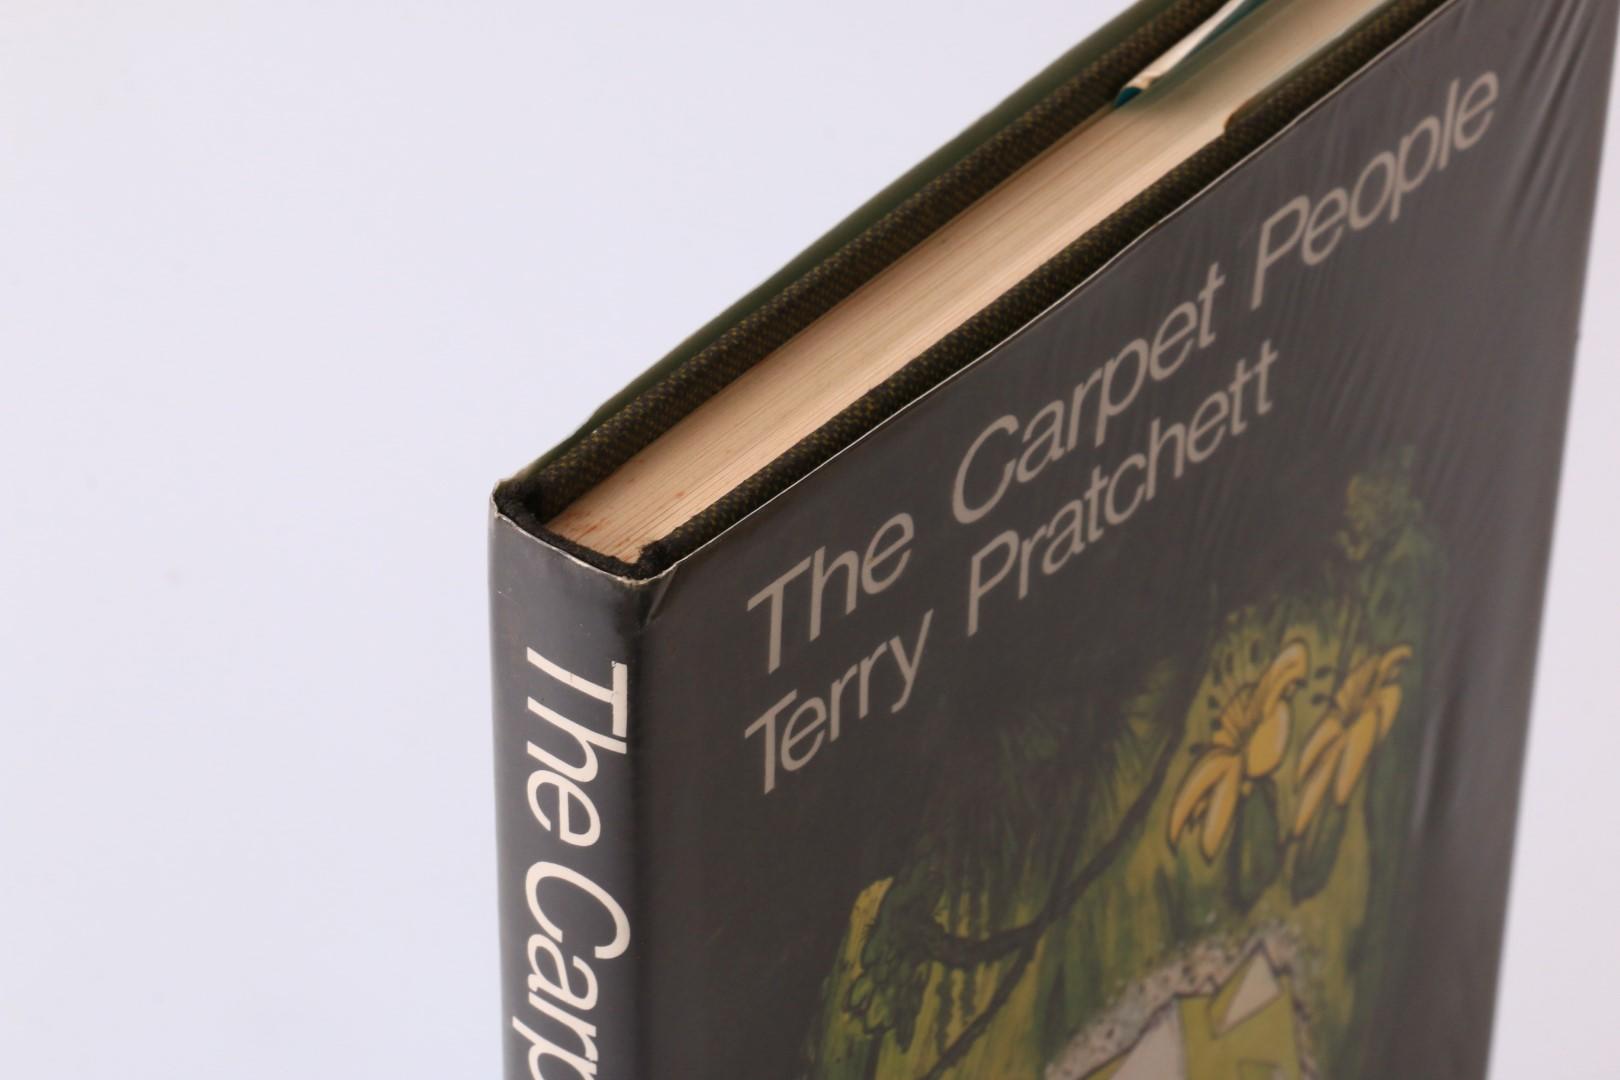 Terry Pratchett - The Carpet People - Colin Smythe, 1971, Signed First Edition.